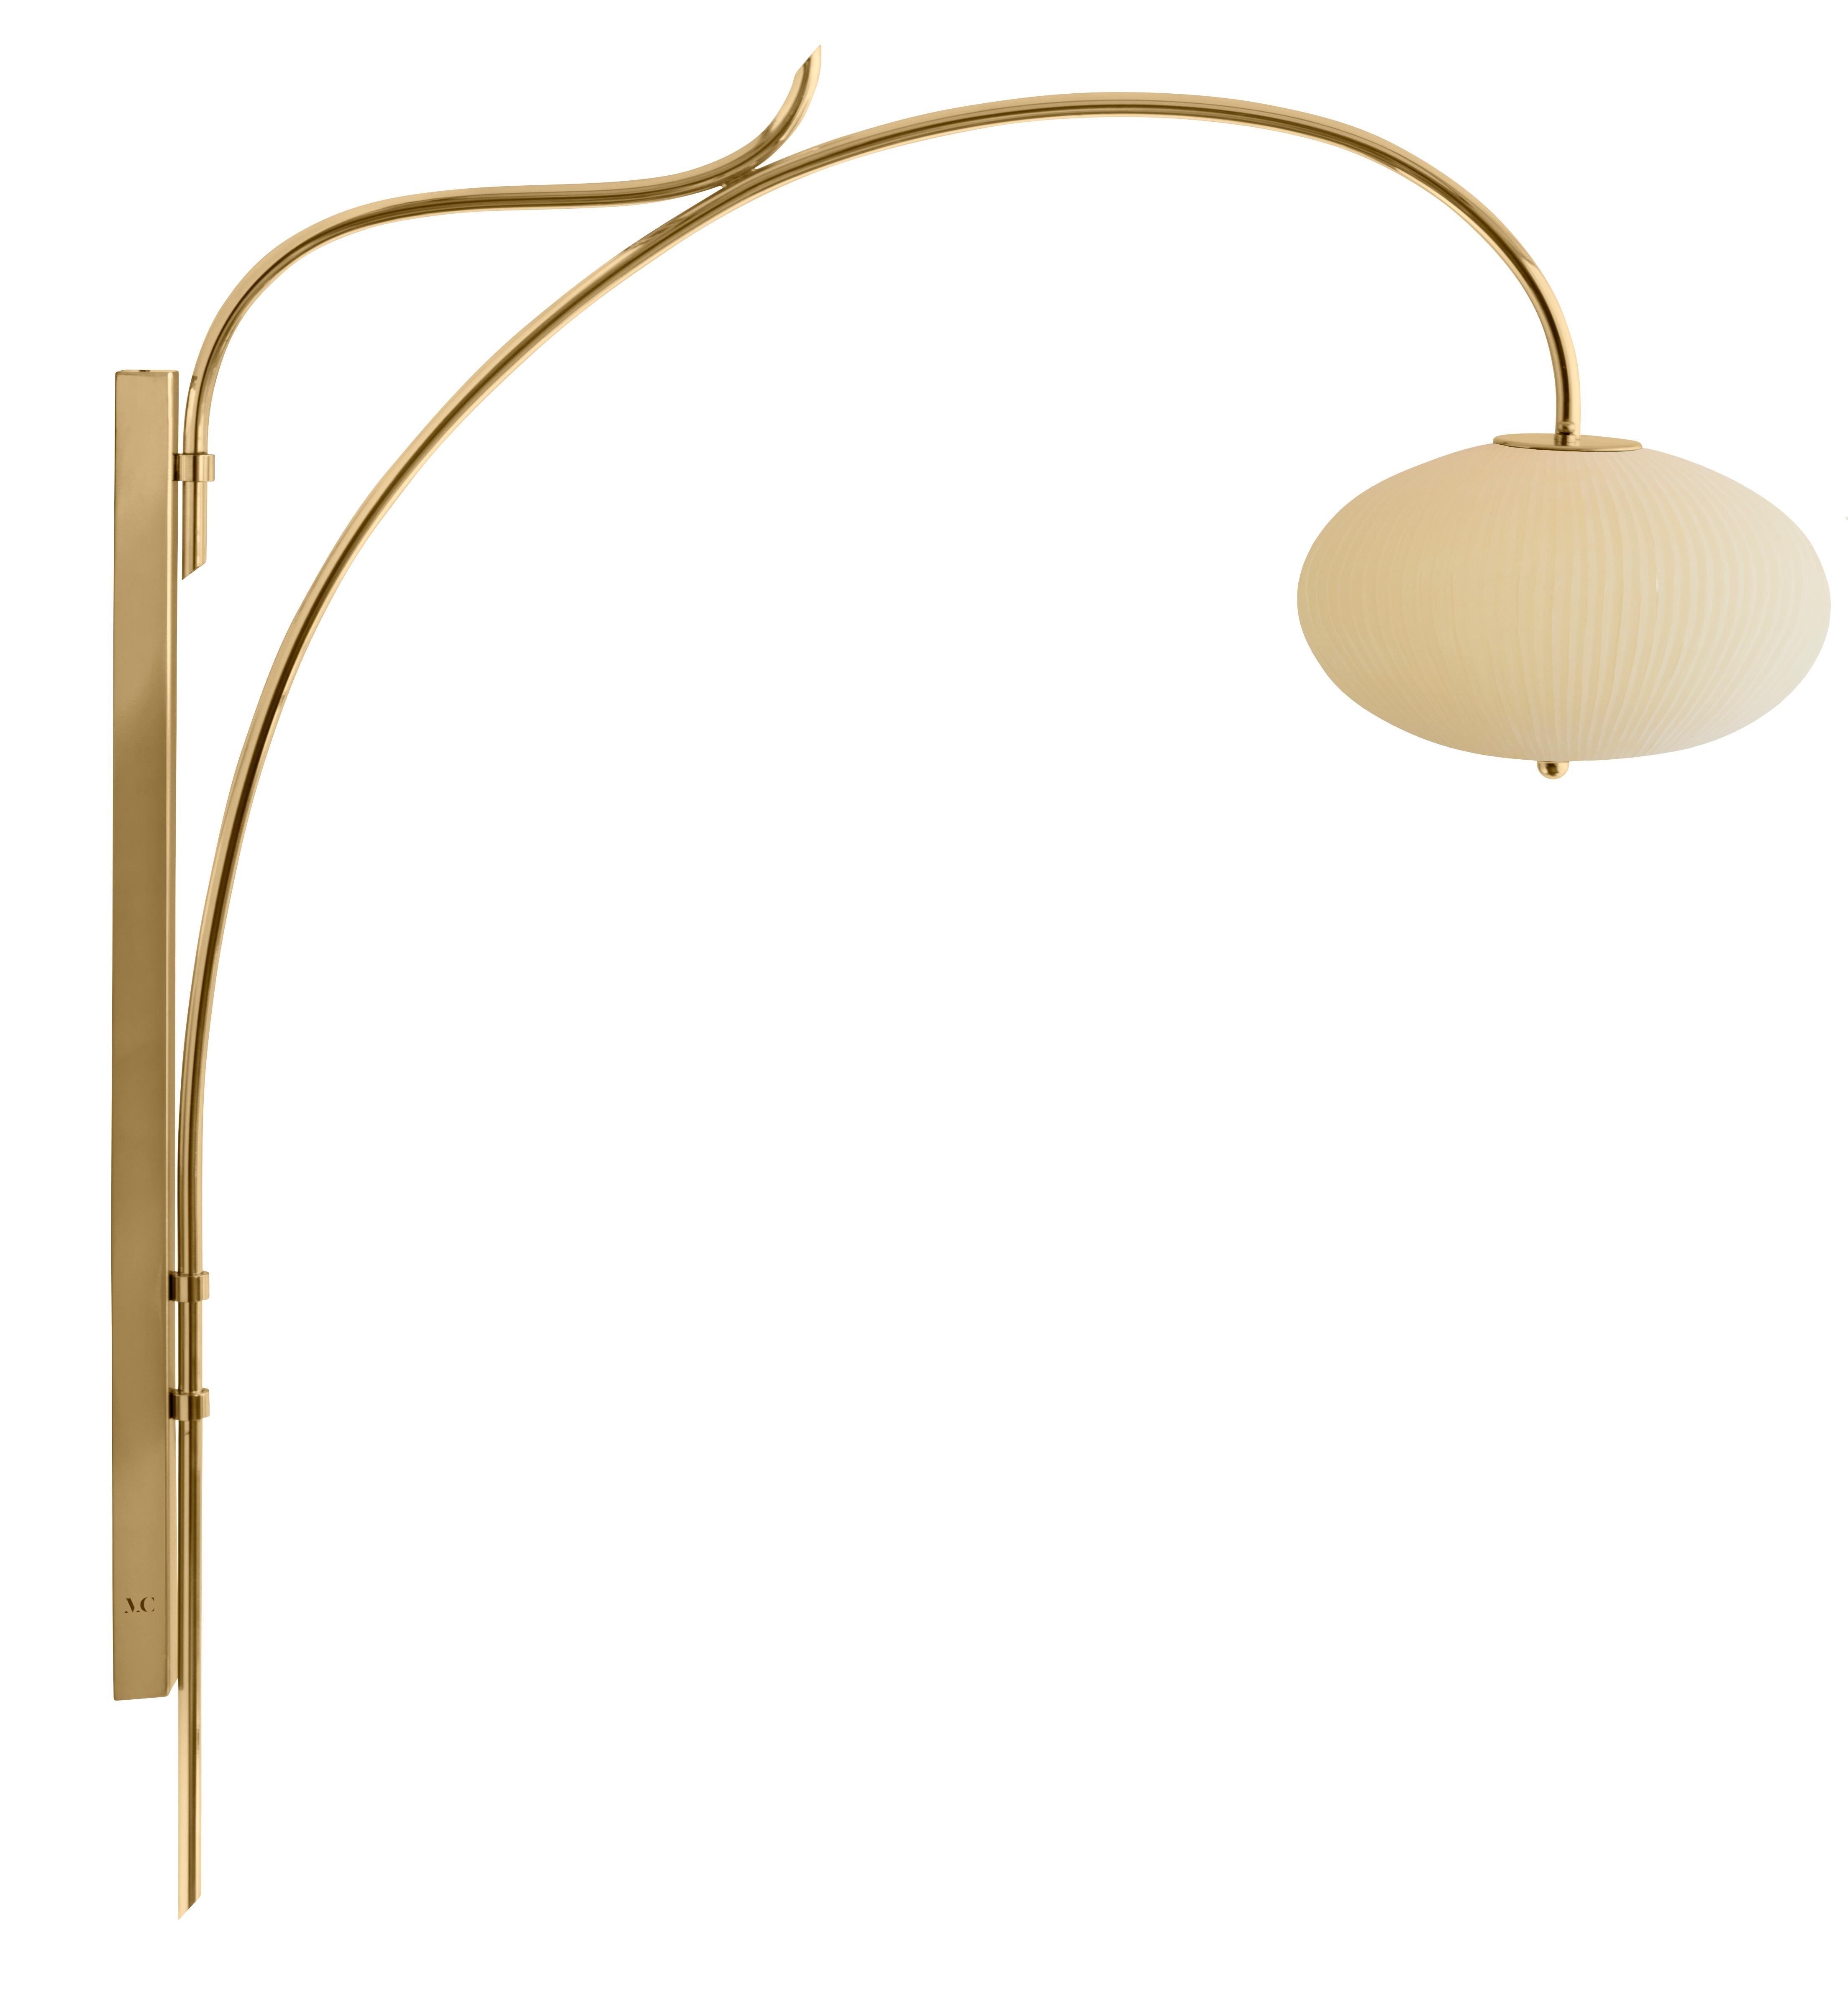 Wall lamp China 07 by Magic Circus Editions.
Dimensions: H 120 x W 32 x D 113.5 cm.
Materials: brass, mouth blown glass sculpted with a diamond saw.
Colour: mustard.

Available finishes: brass, nickel.
Available colours: enamel soft white,